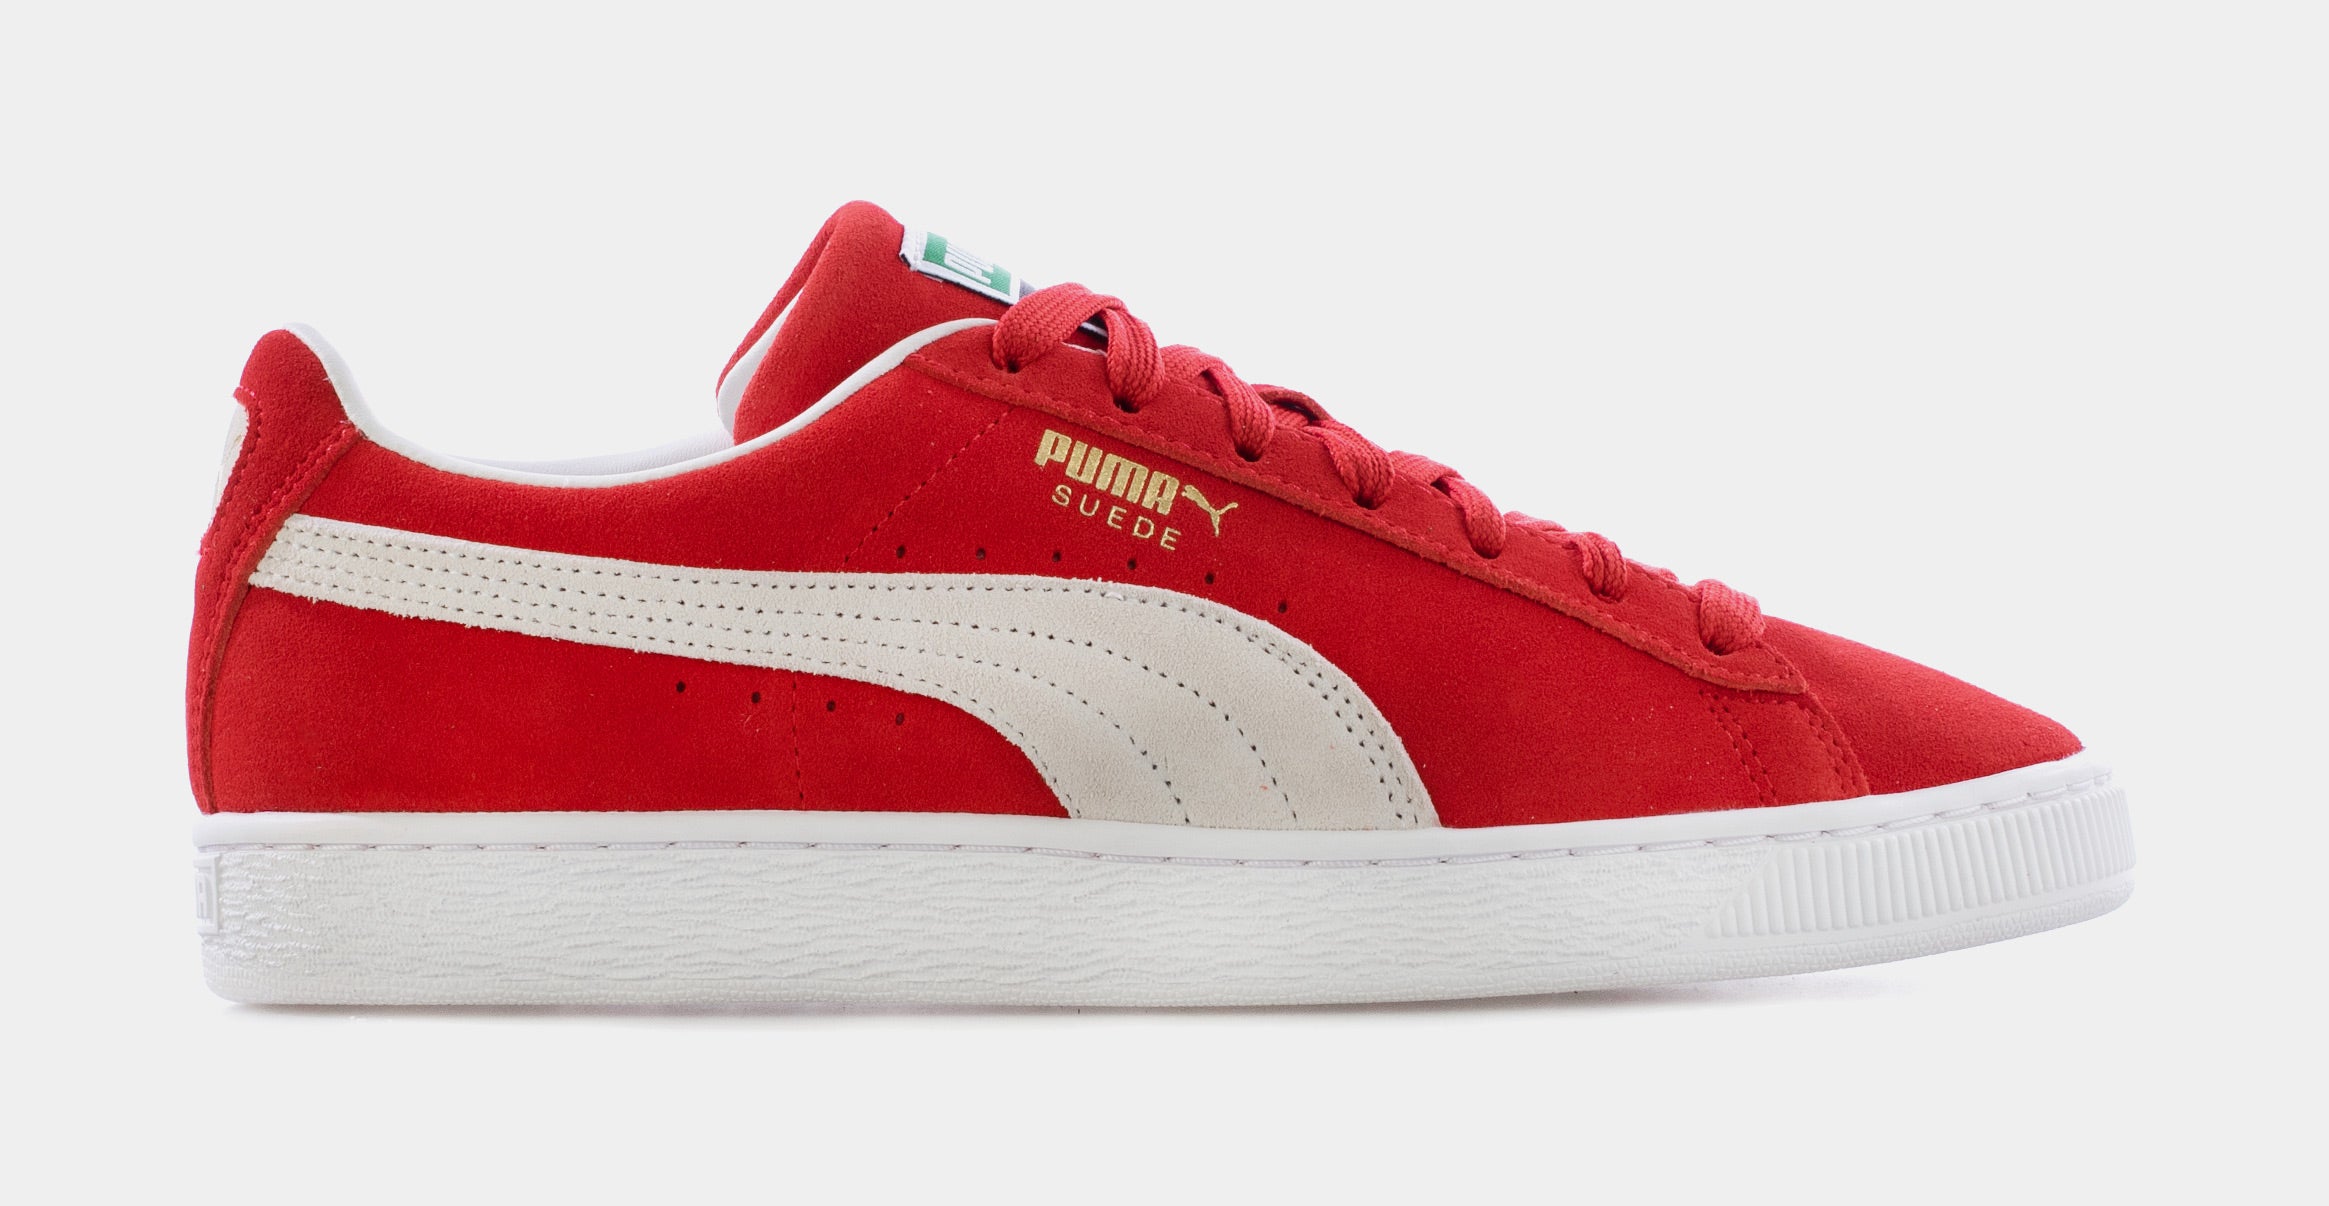 PUMA Suede Classic Mens Lifestyle Shoe Red 374915 02 Shoe Palace